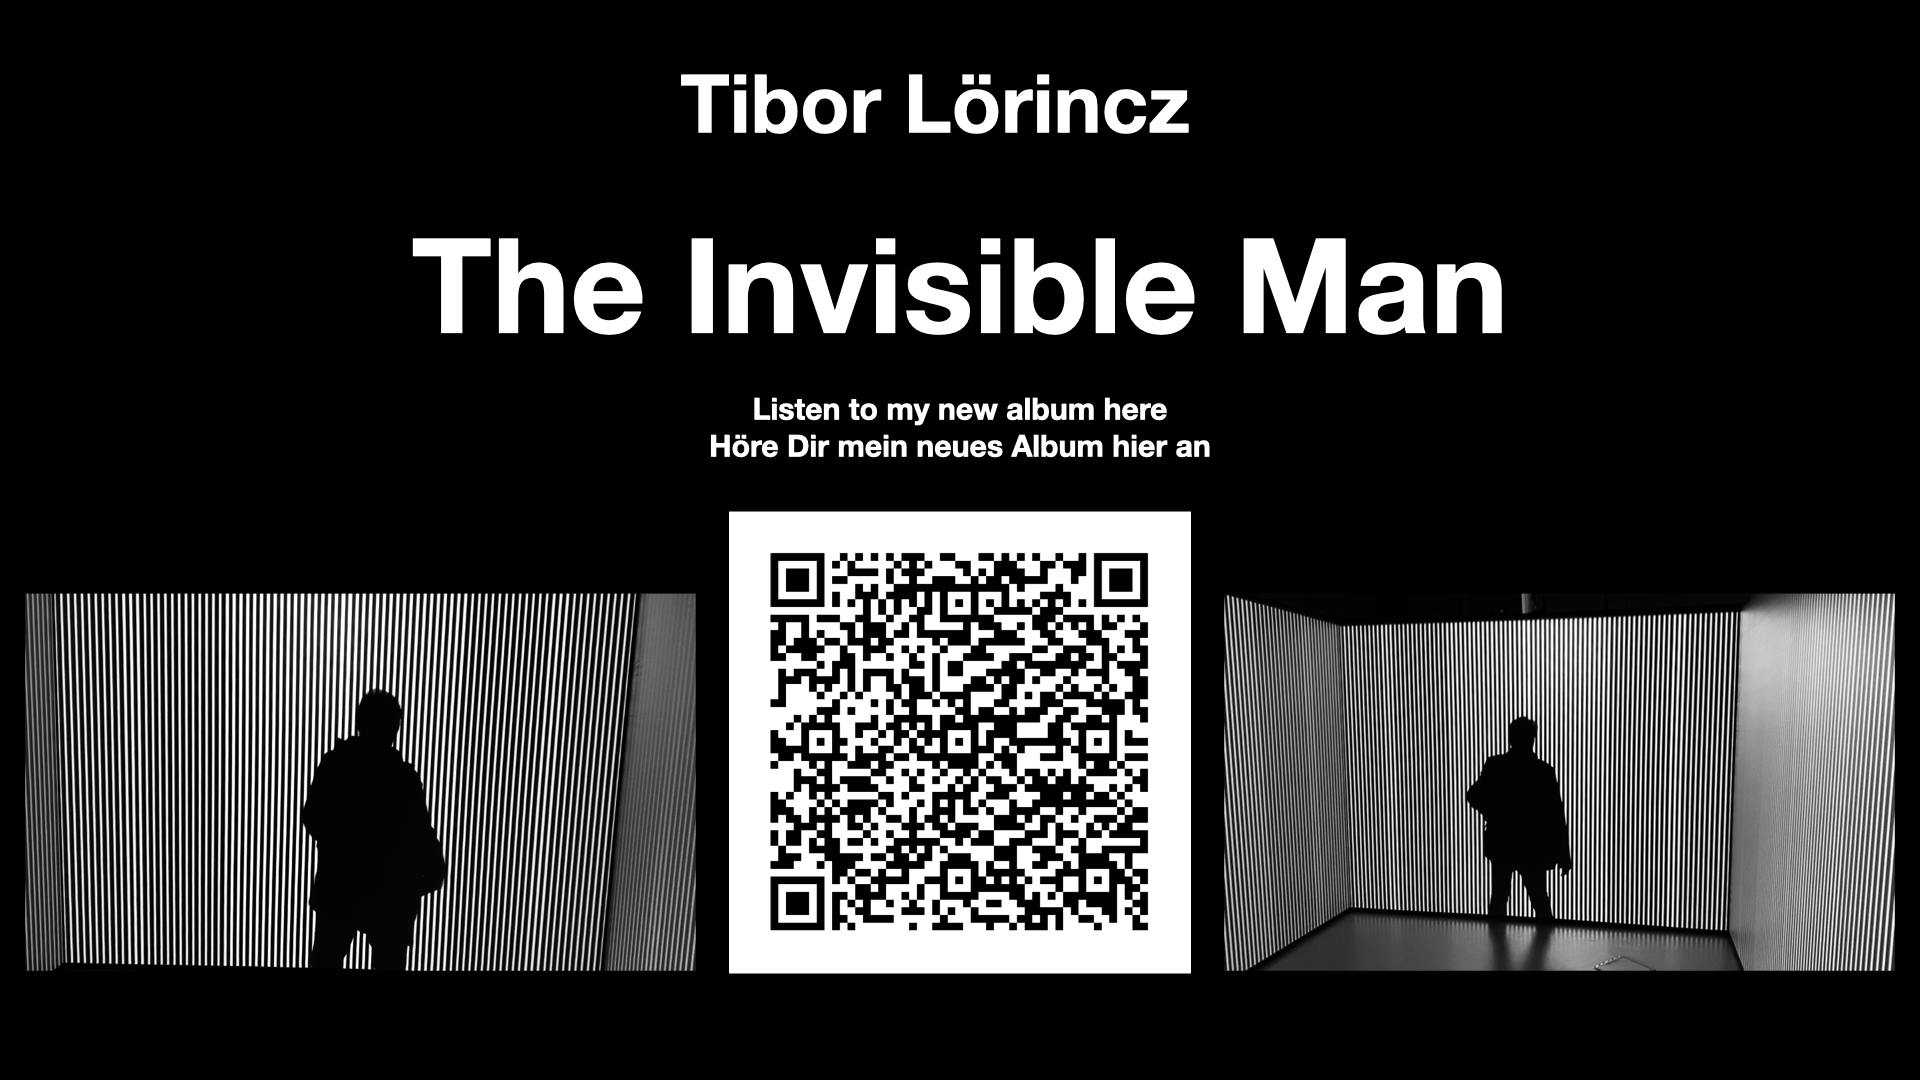 We proudly present the new Electronica Album from Tibor Lörincz - The Invisible Man. Please get the music here for free and share it!